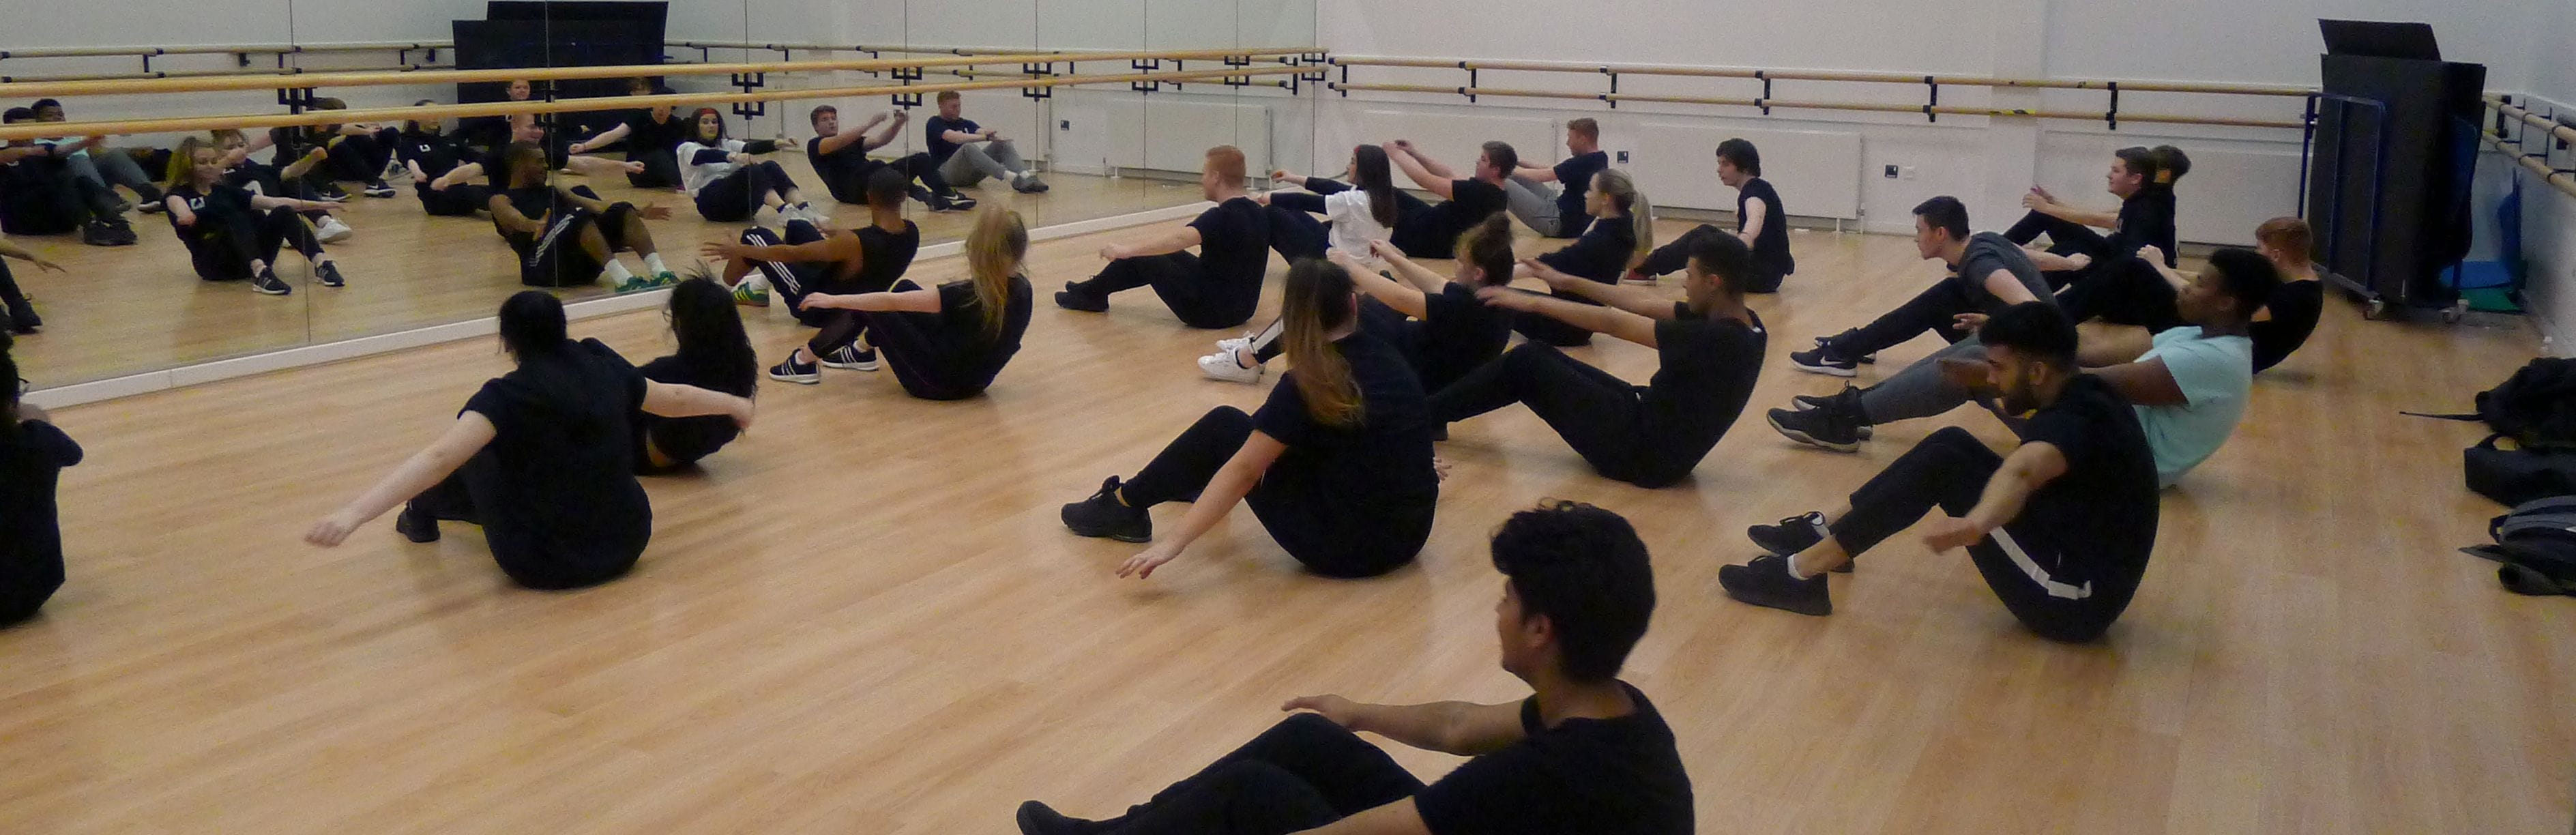 performing arts students sitting on studio floor with backs to camera